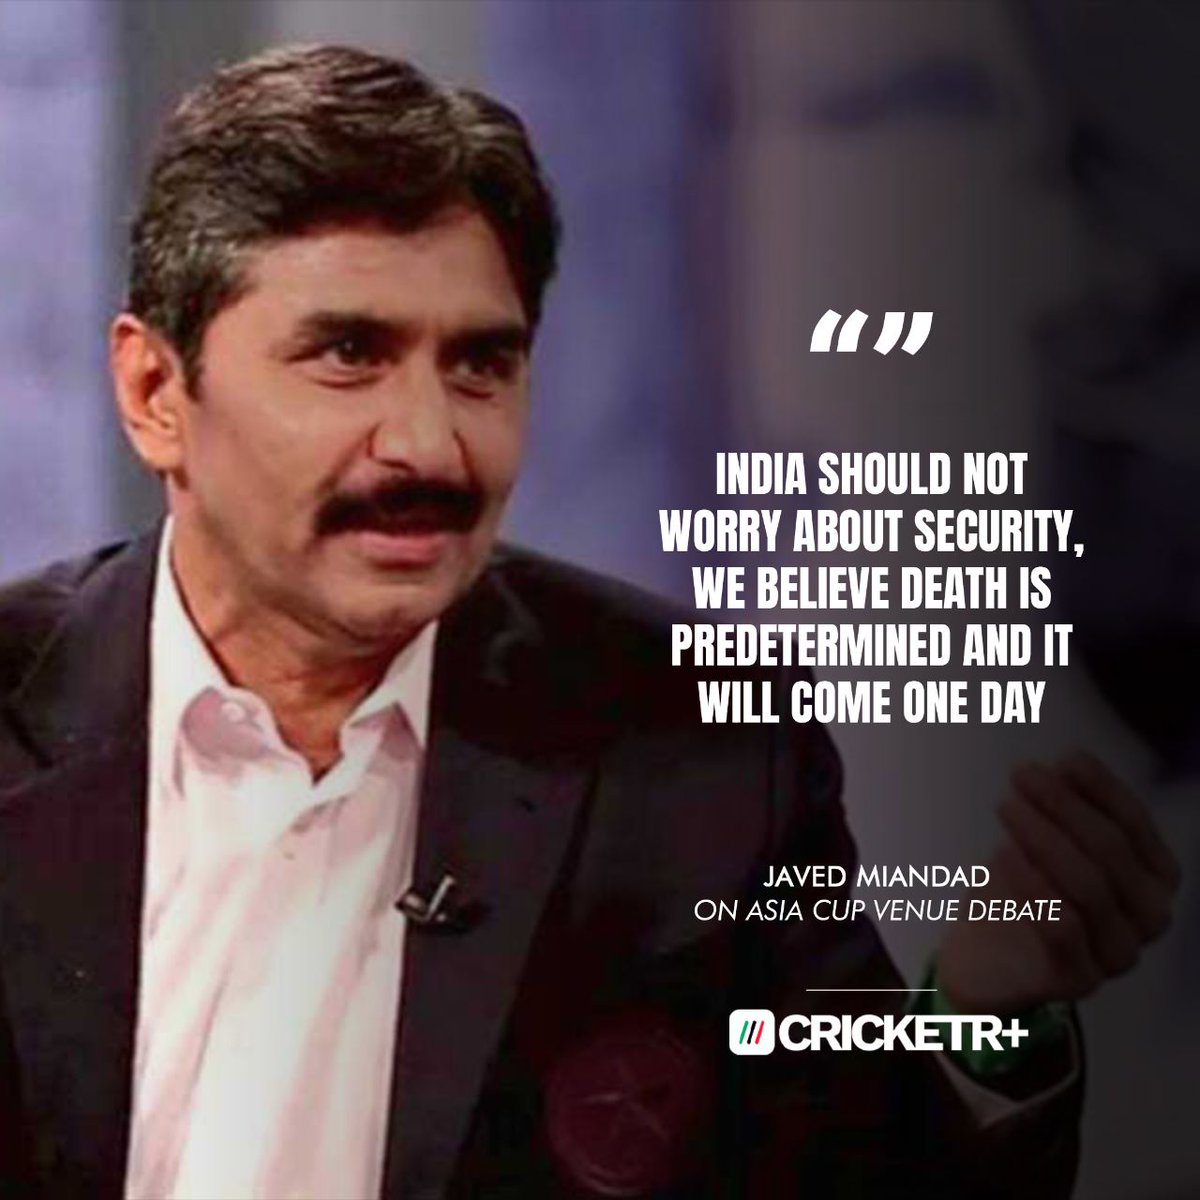 Javed Miandad believes 'fear of death' shouldn't be stopping India from coming to Pakistan

Your thoughts on the statement? 💭

#JavedMiandad #CricketR #PAKvIND